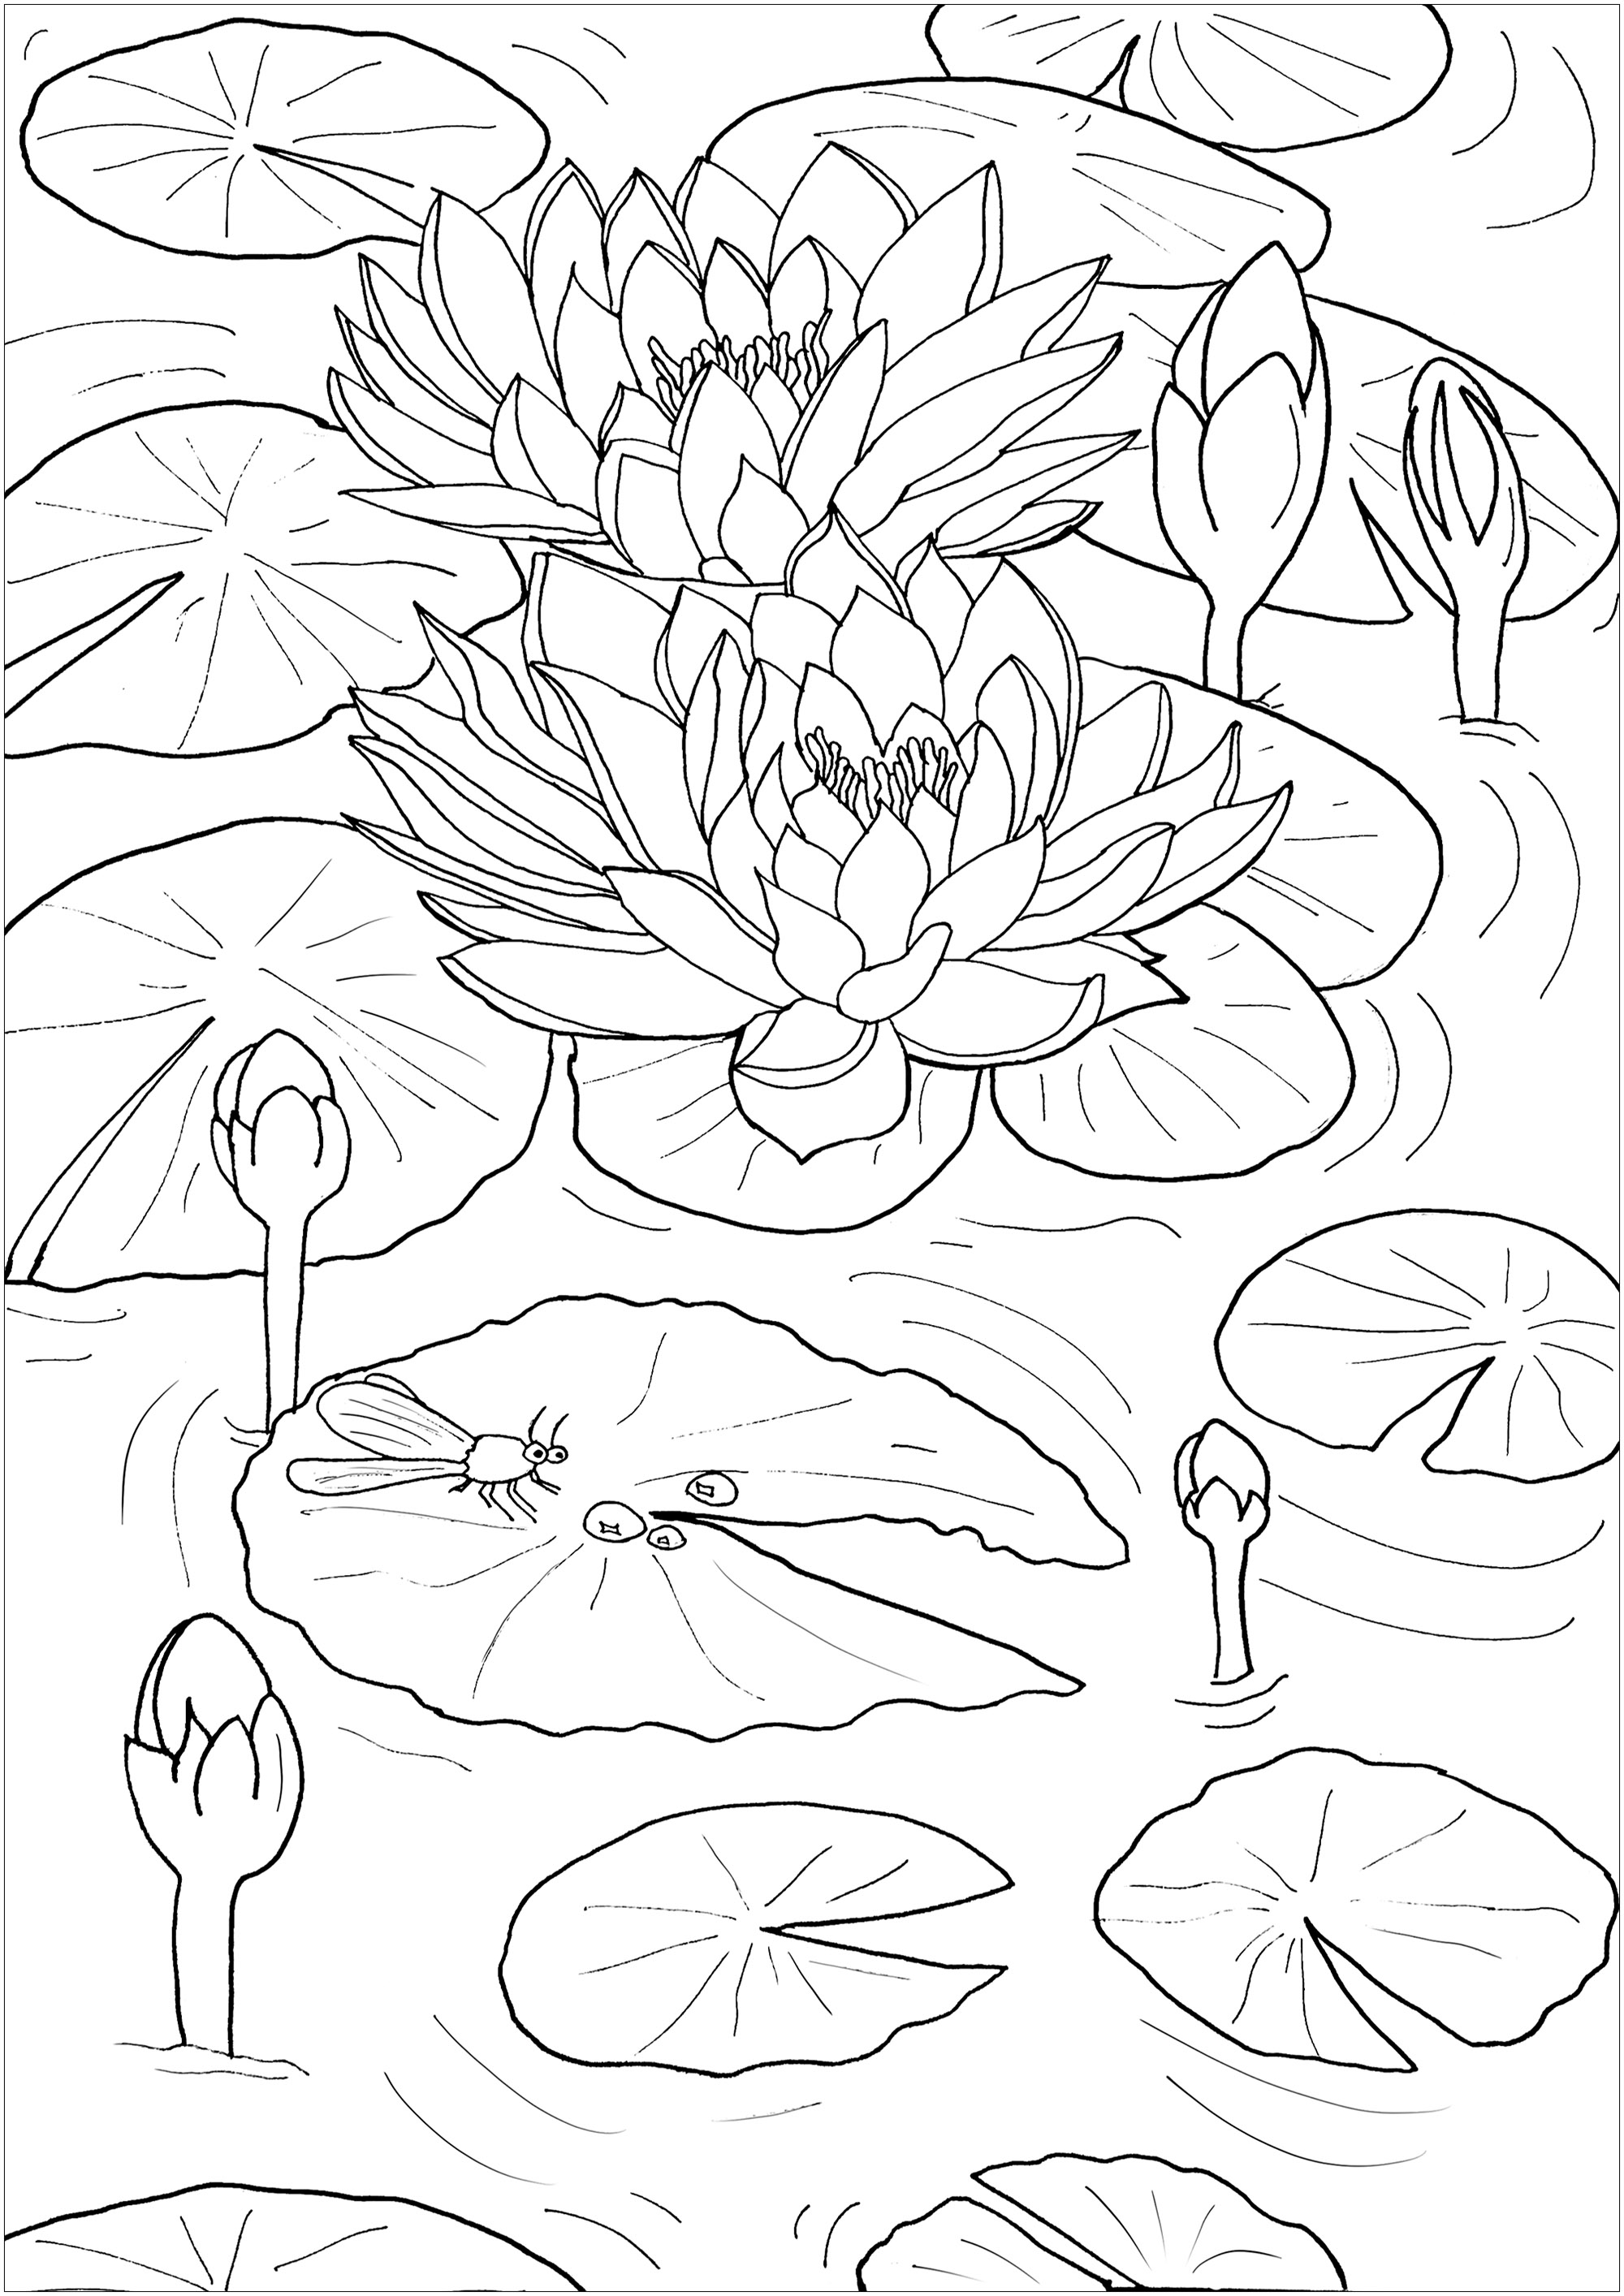 Coloring page of Water lilies and a little dragonfly, Artist : Olivier